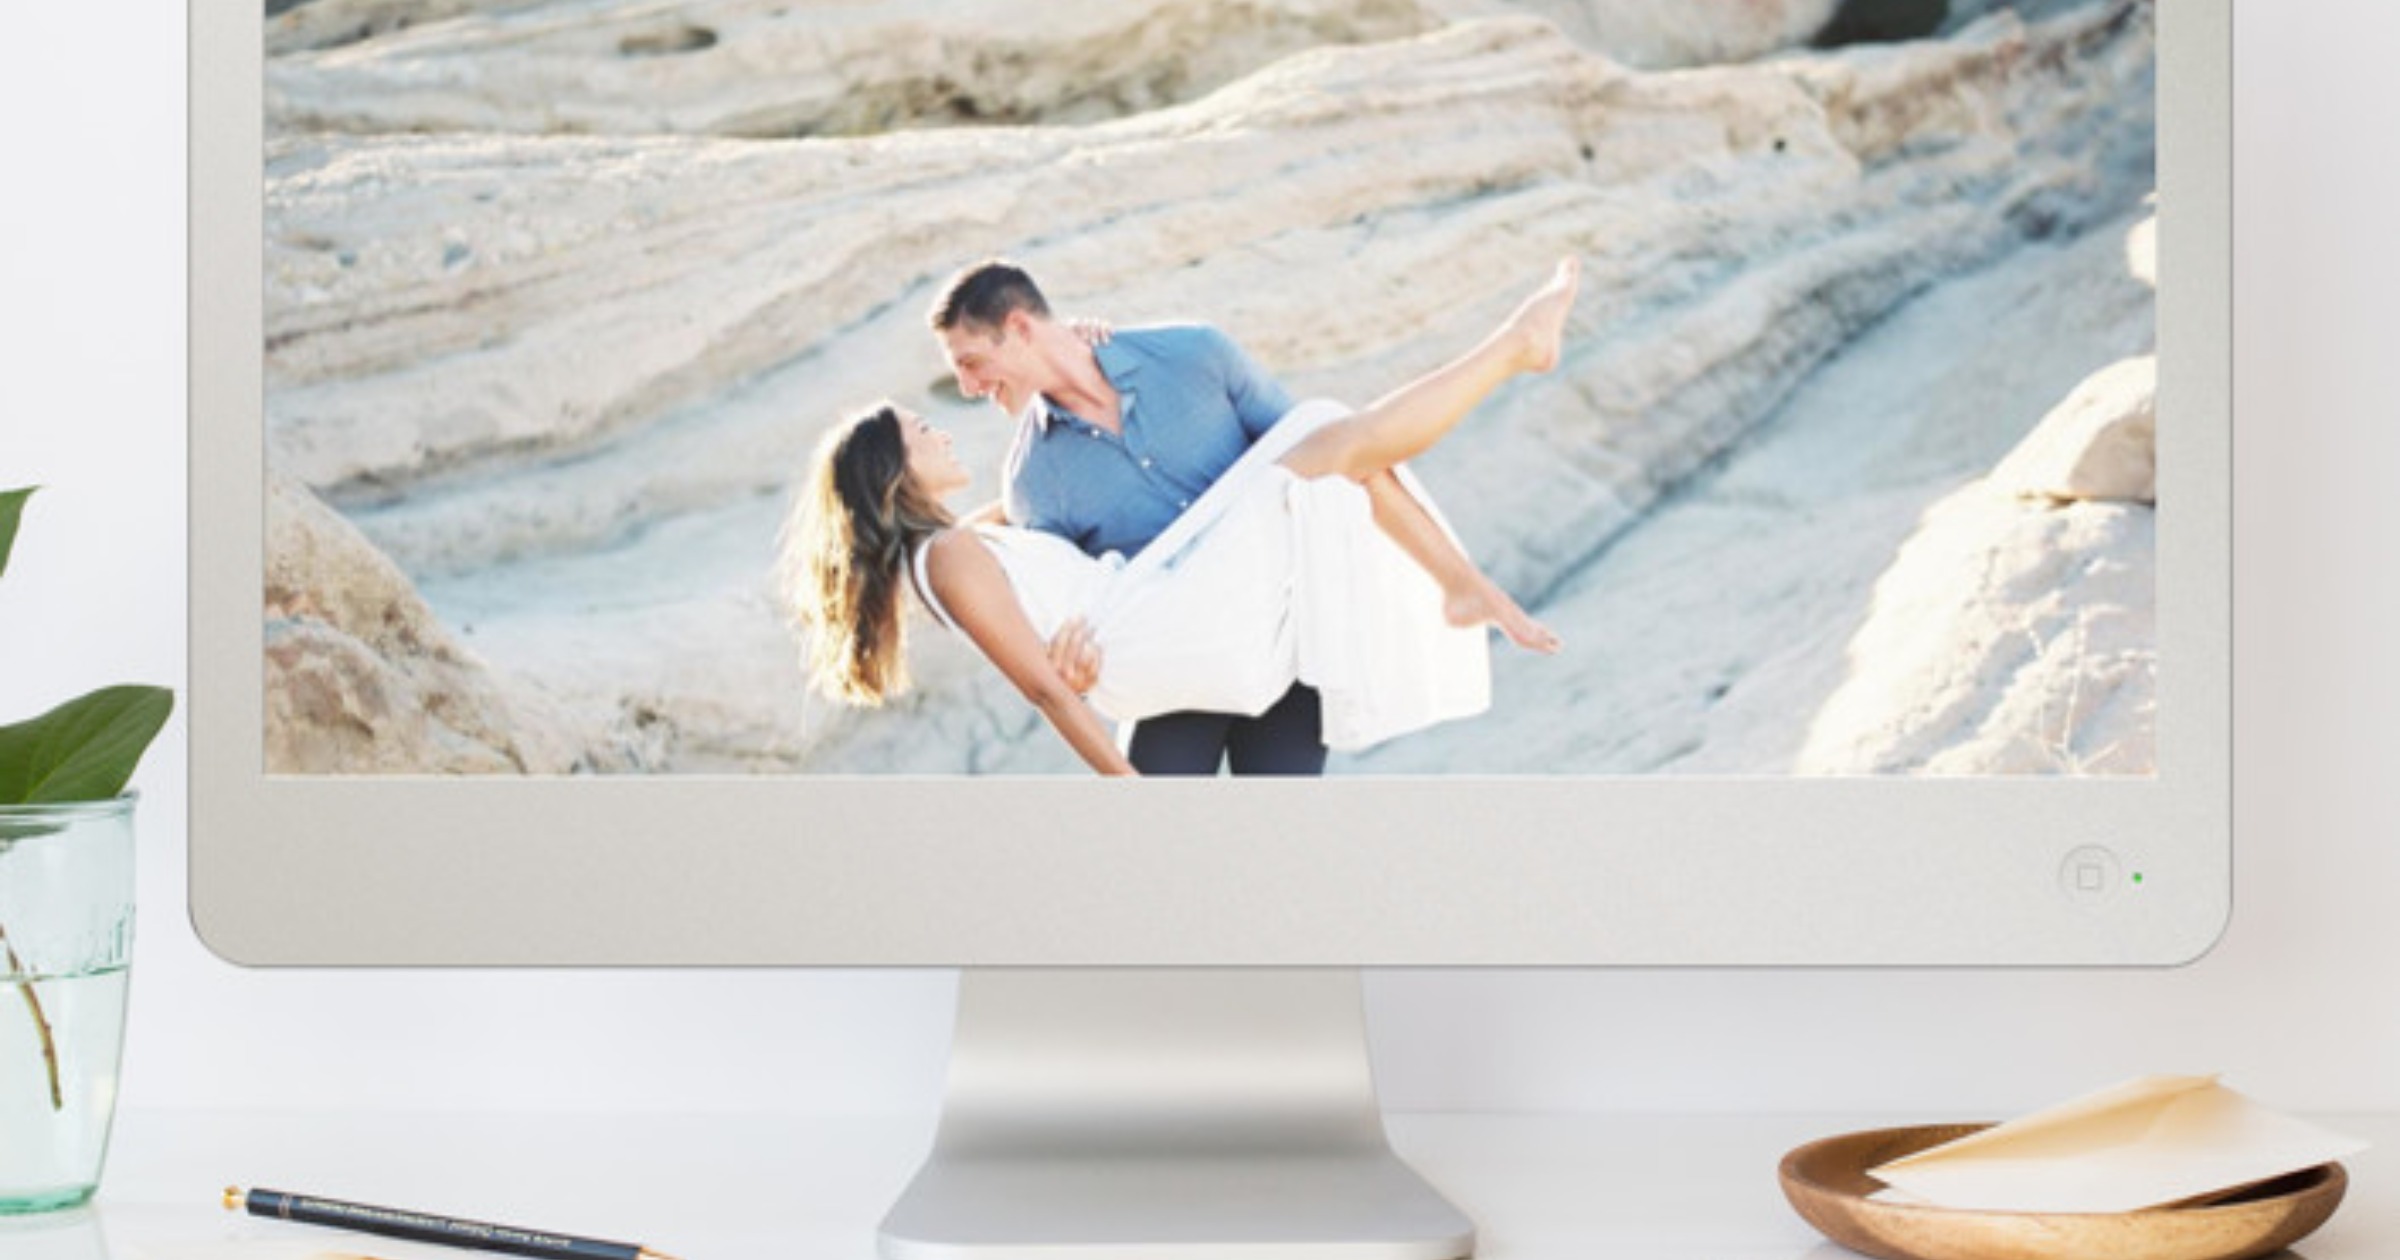 Free wedding websites + new wedding stationery from Minted